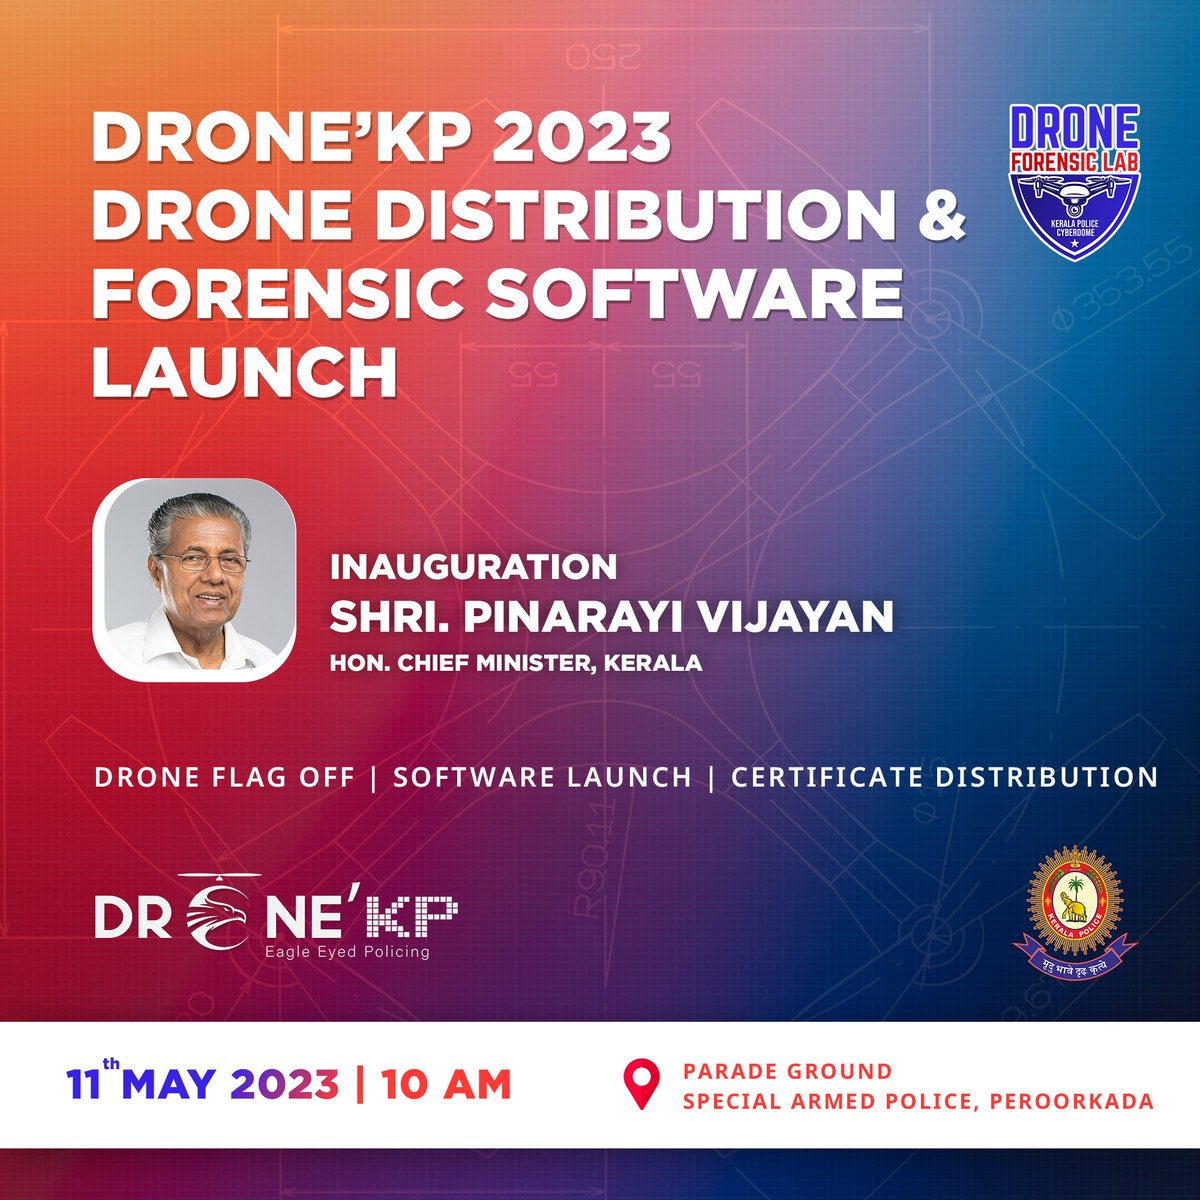 Drone'KP 203 Drone Distribution and Forensic software launch by Hon.Chief Minister of Kerala Shri. Pinarayi Vijayan on 11th May 2023 at Special Armed Police Parade ground , Thiruvananthapuram